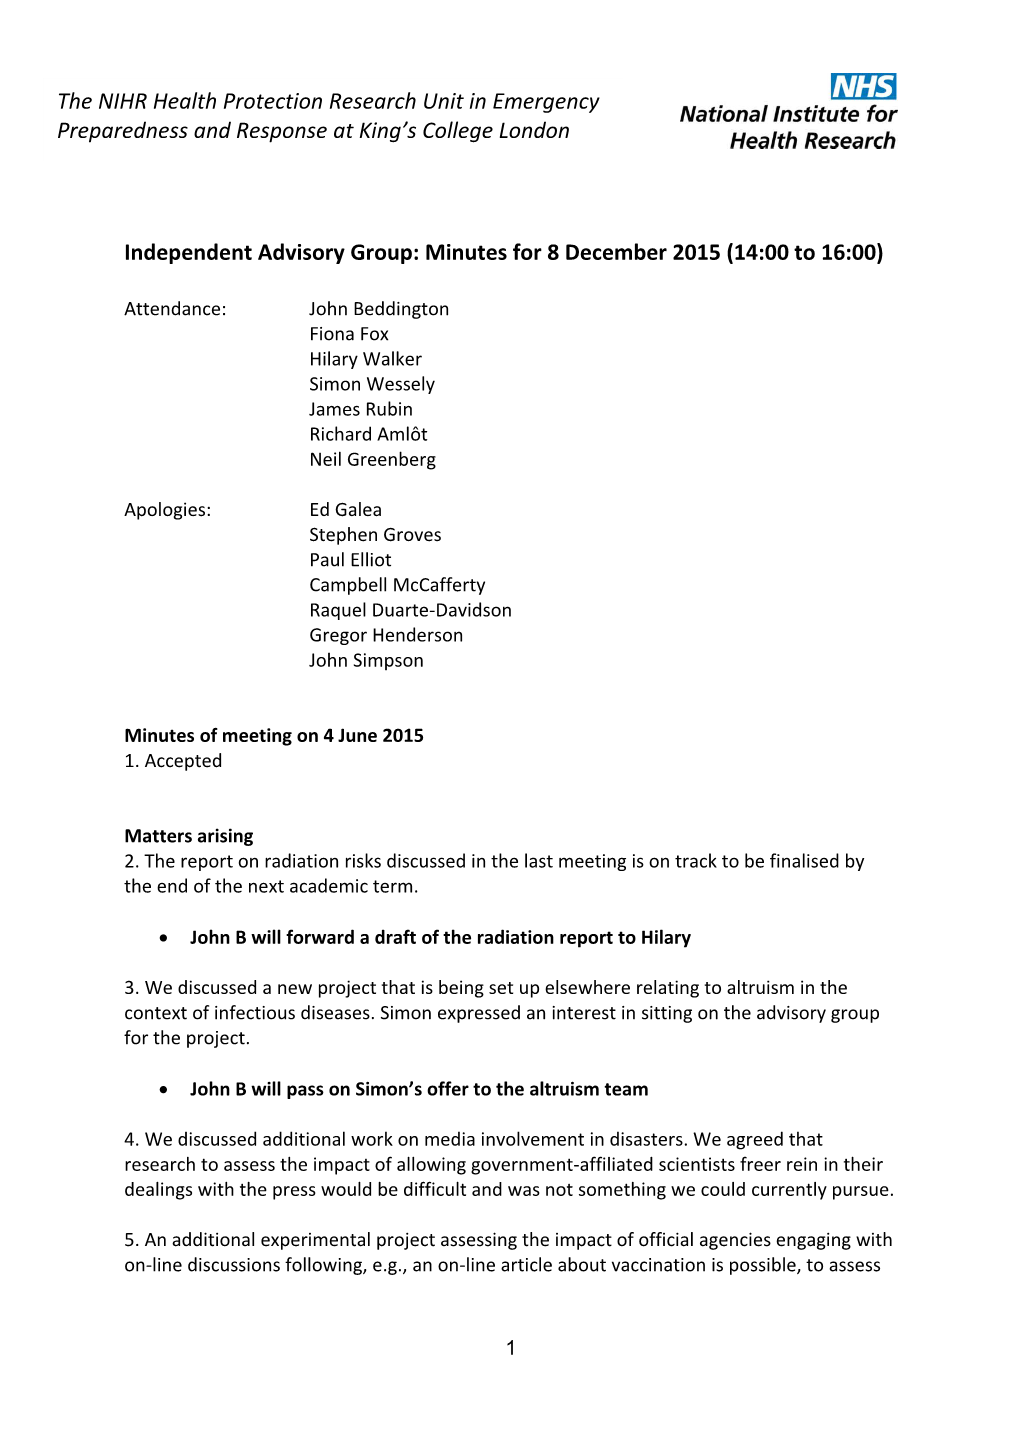 Independent Advisory Group: Minutes for 8December 2015 (14:00 to 16:00)